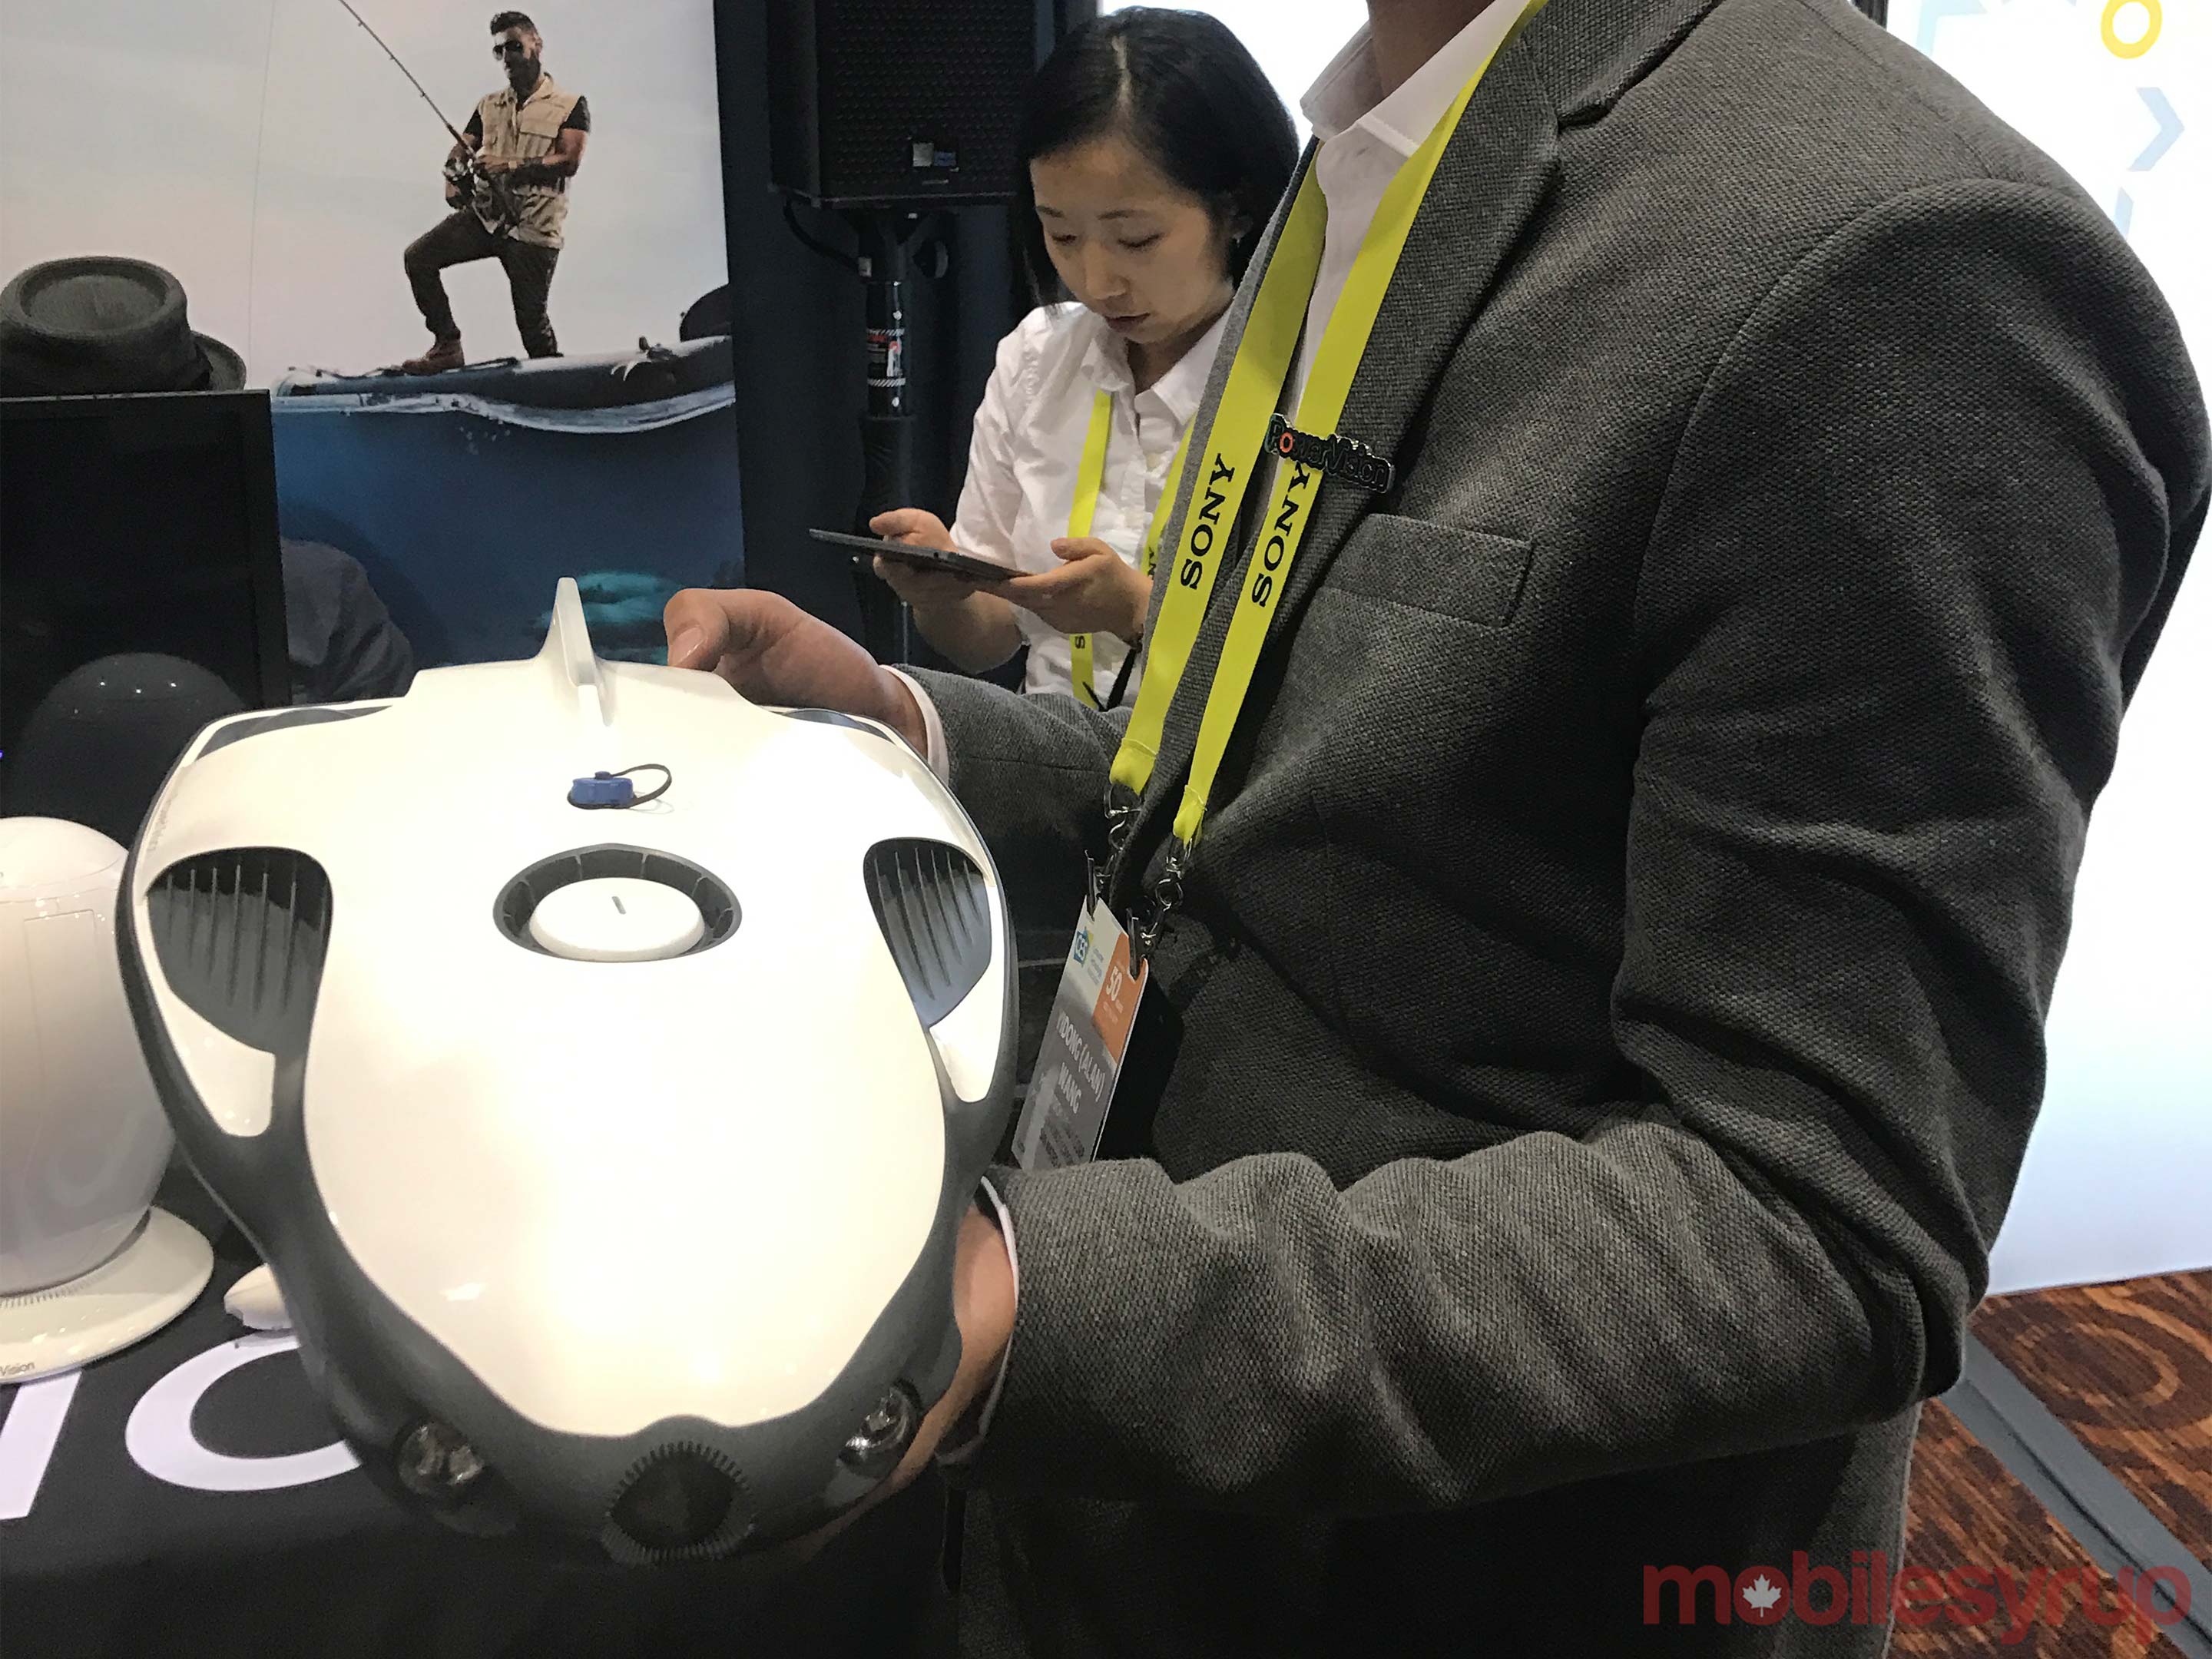 PowerVision's-PowerRay-underwater-drone-has-optional-VR-Goggles-to-give-you-a-whole-new-POV-on-fish